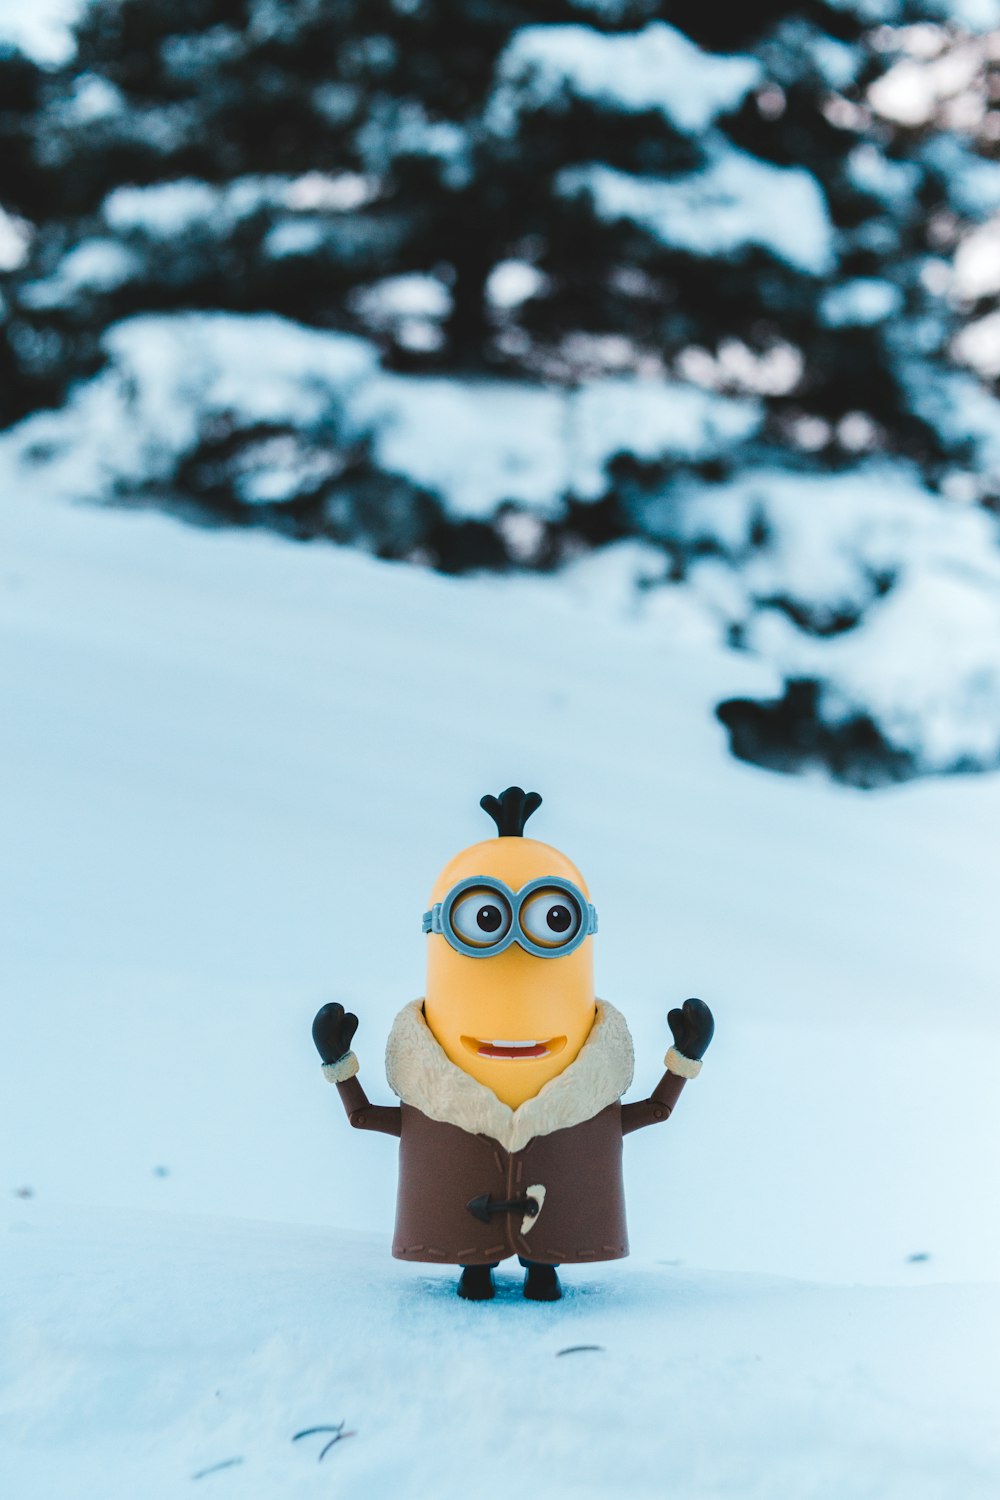 a toy figure of a minion standing in the snow